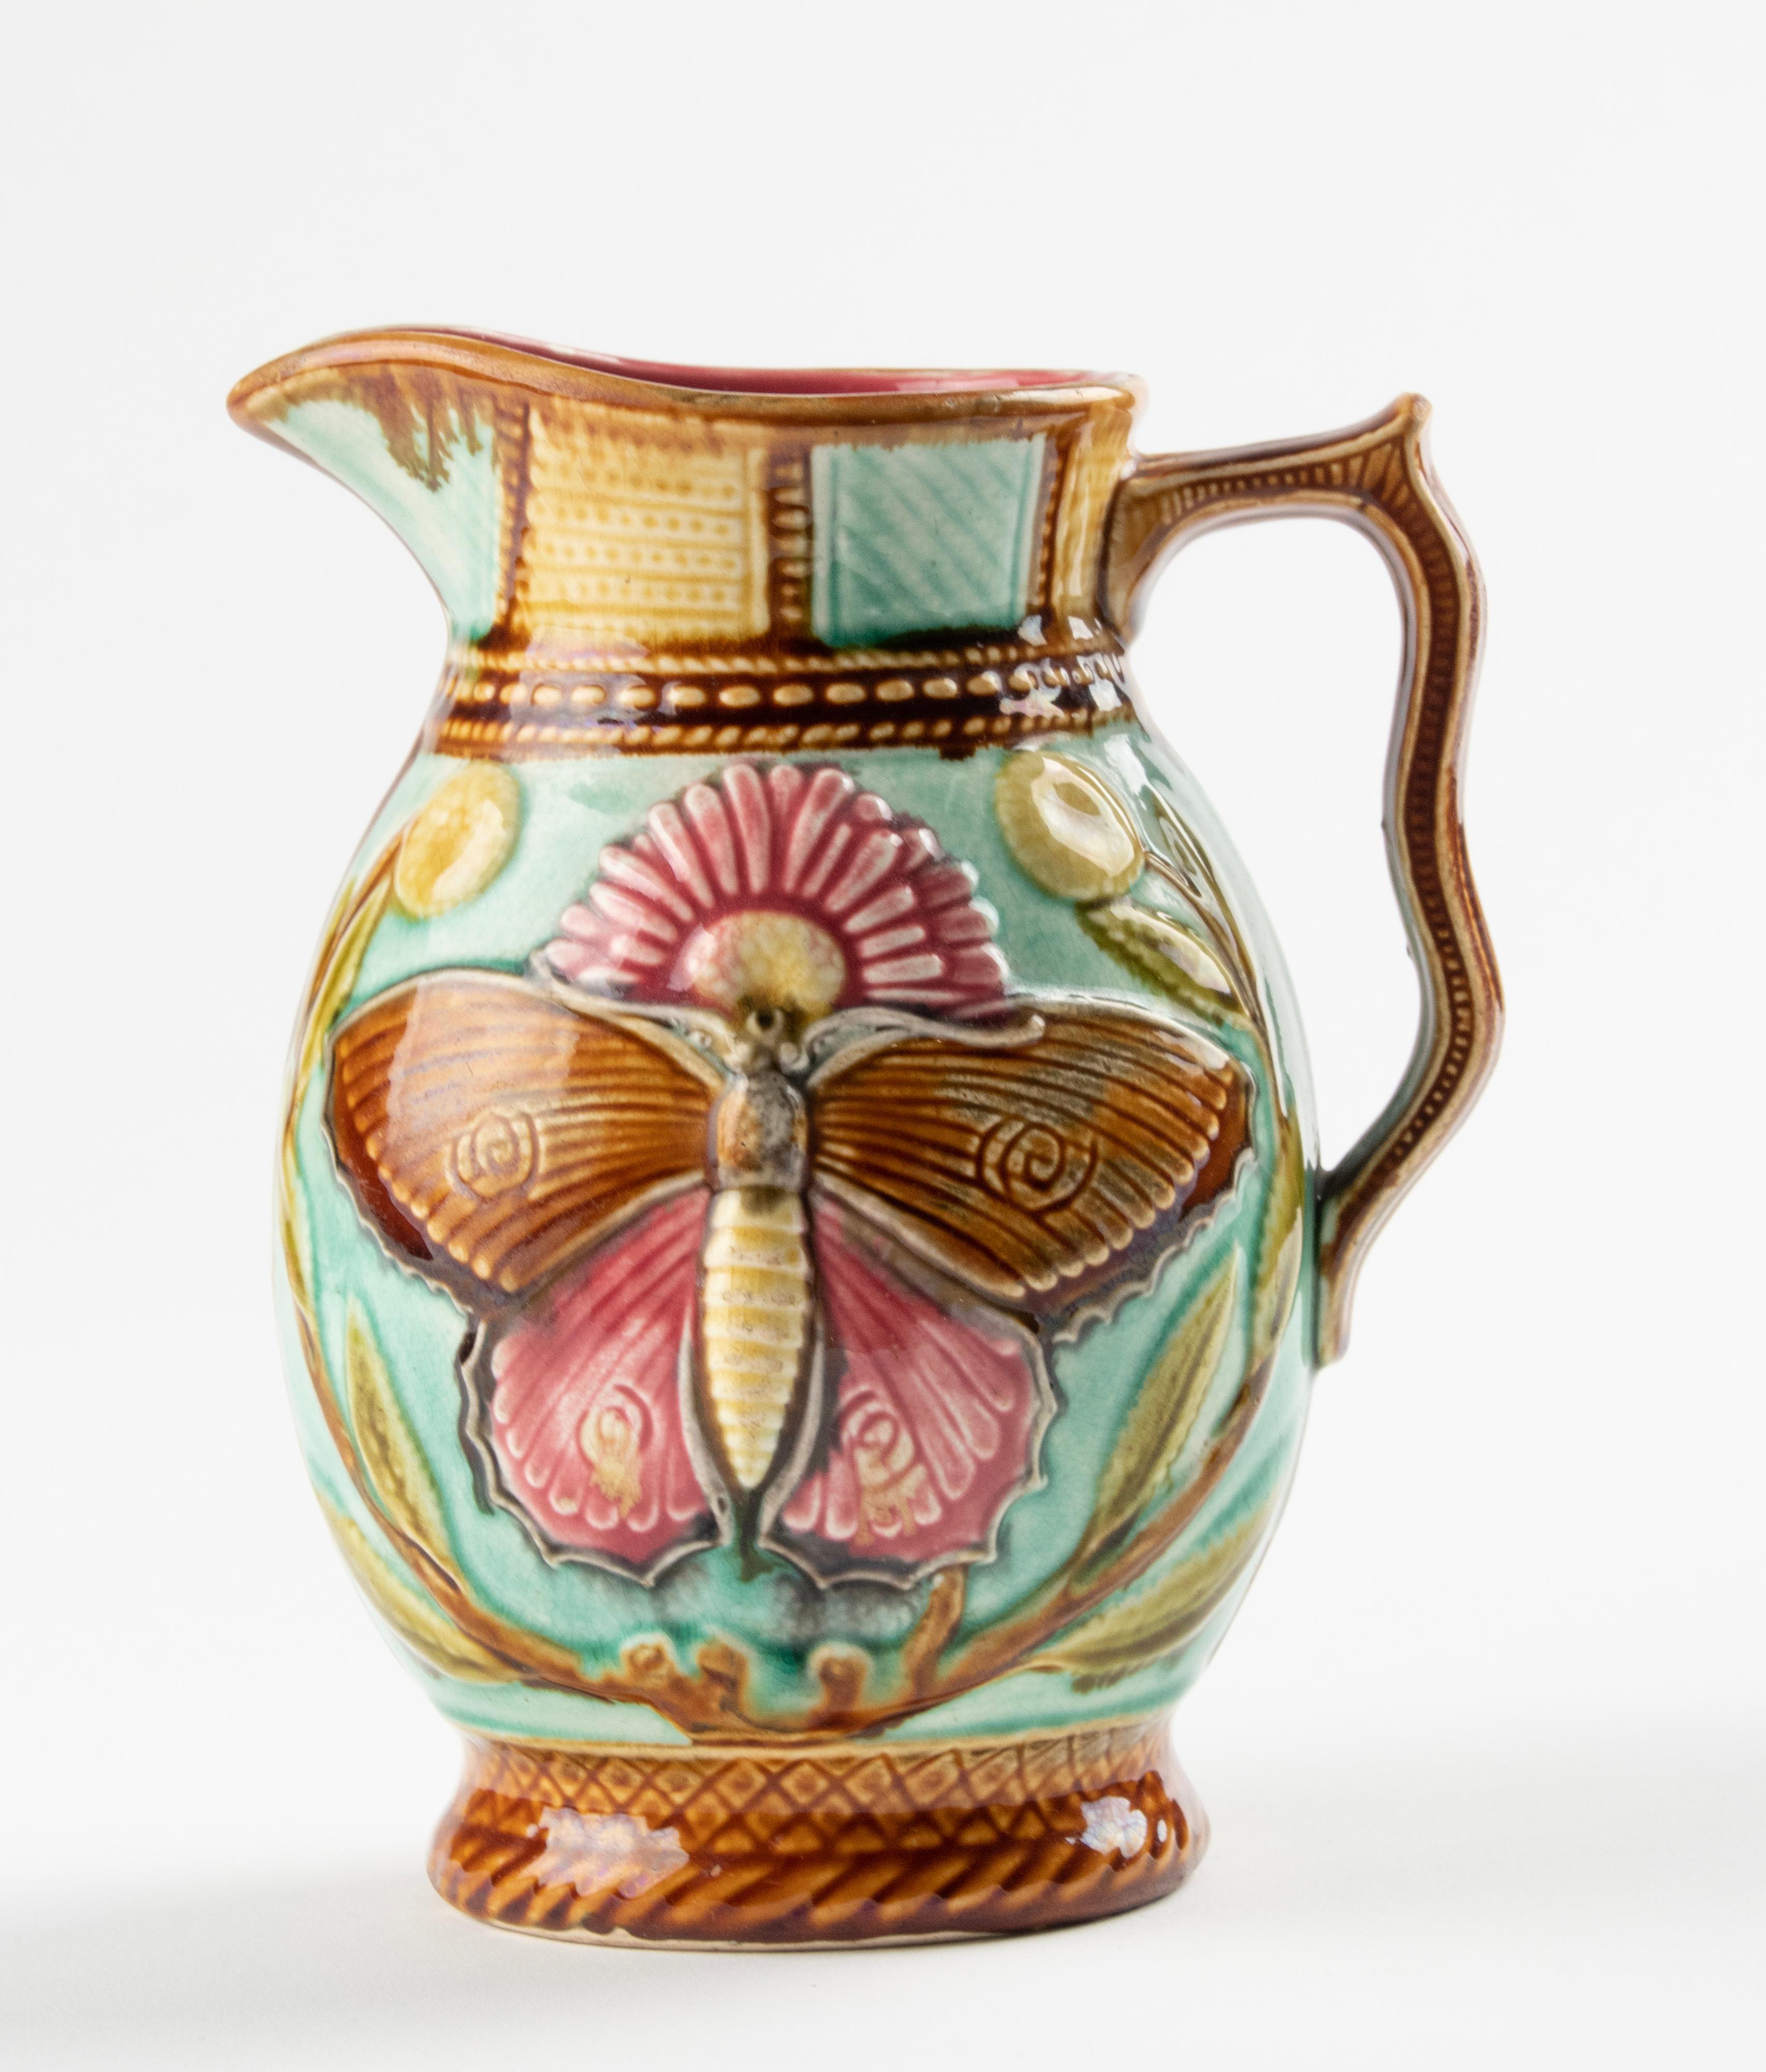 Lovely majolica ceramic pitcher. Beautiful decor with a large butterfly and vibrant colours. The jug is marked on the bottom, but the mark is not legible. Presumably French.
The jug is in good condition.